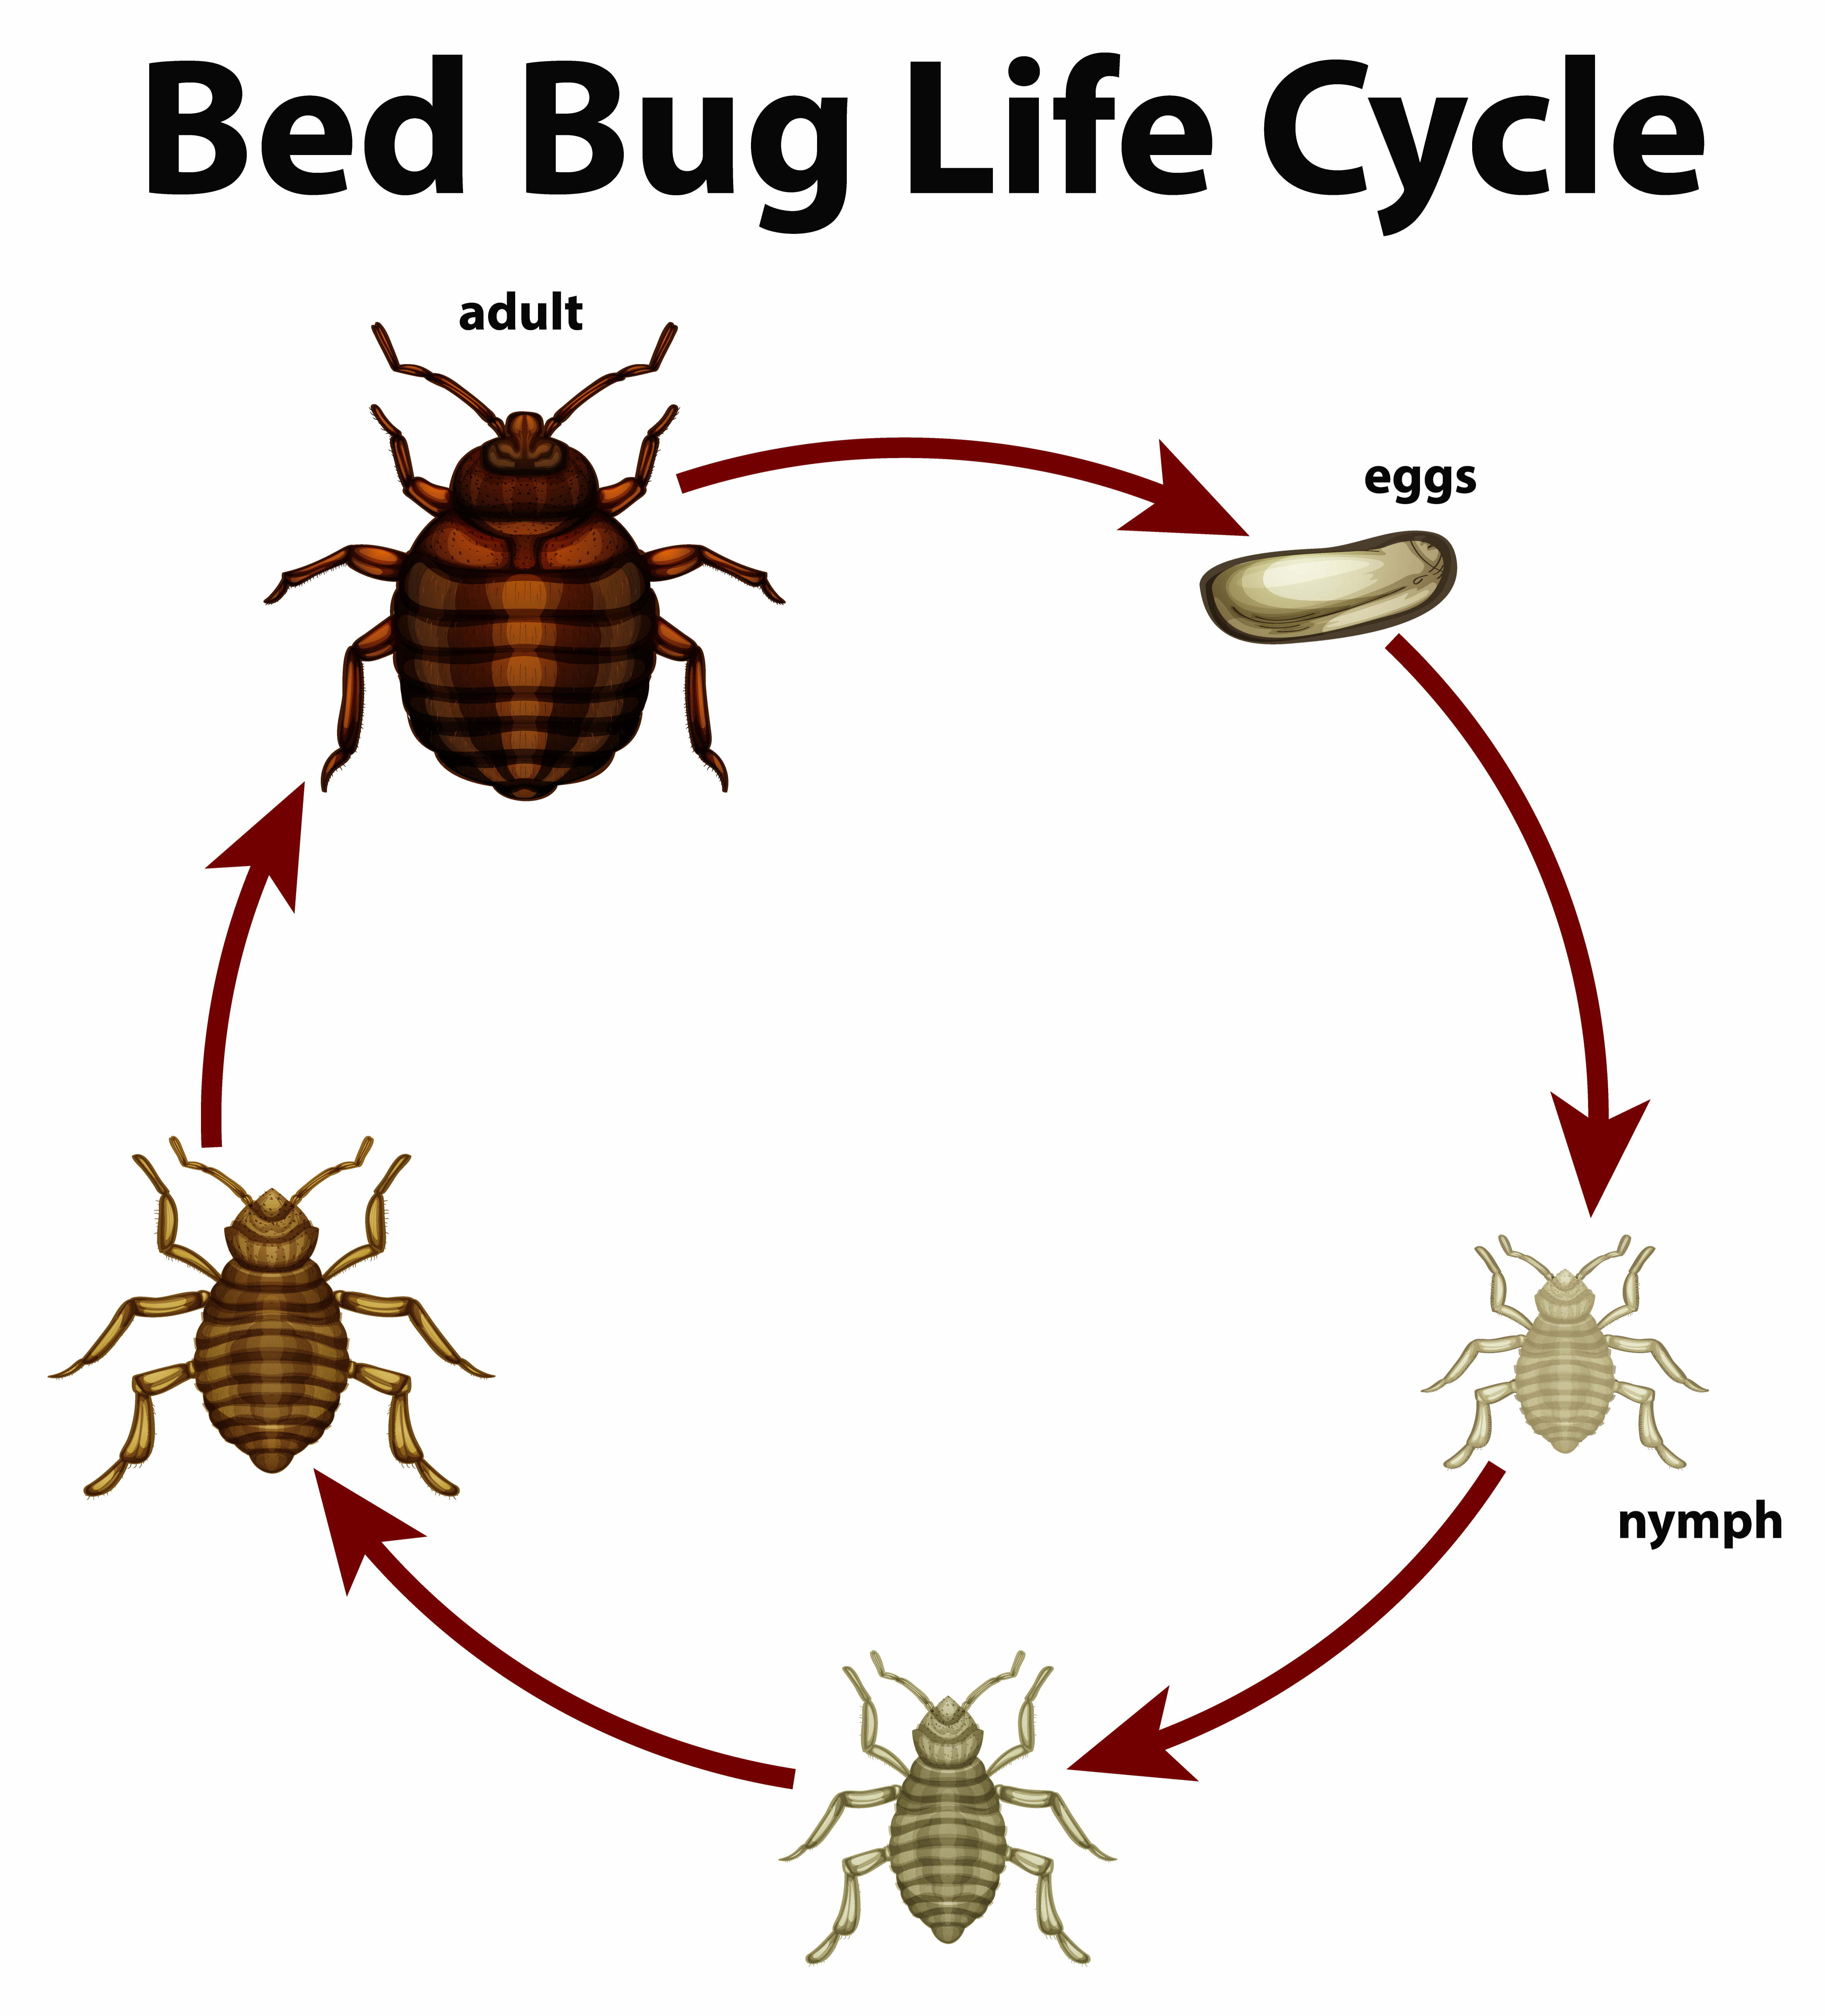 Life Cycle of Baby Bed Bugs - Stages of growth and development"